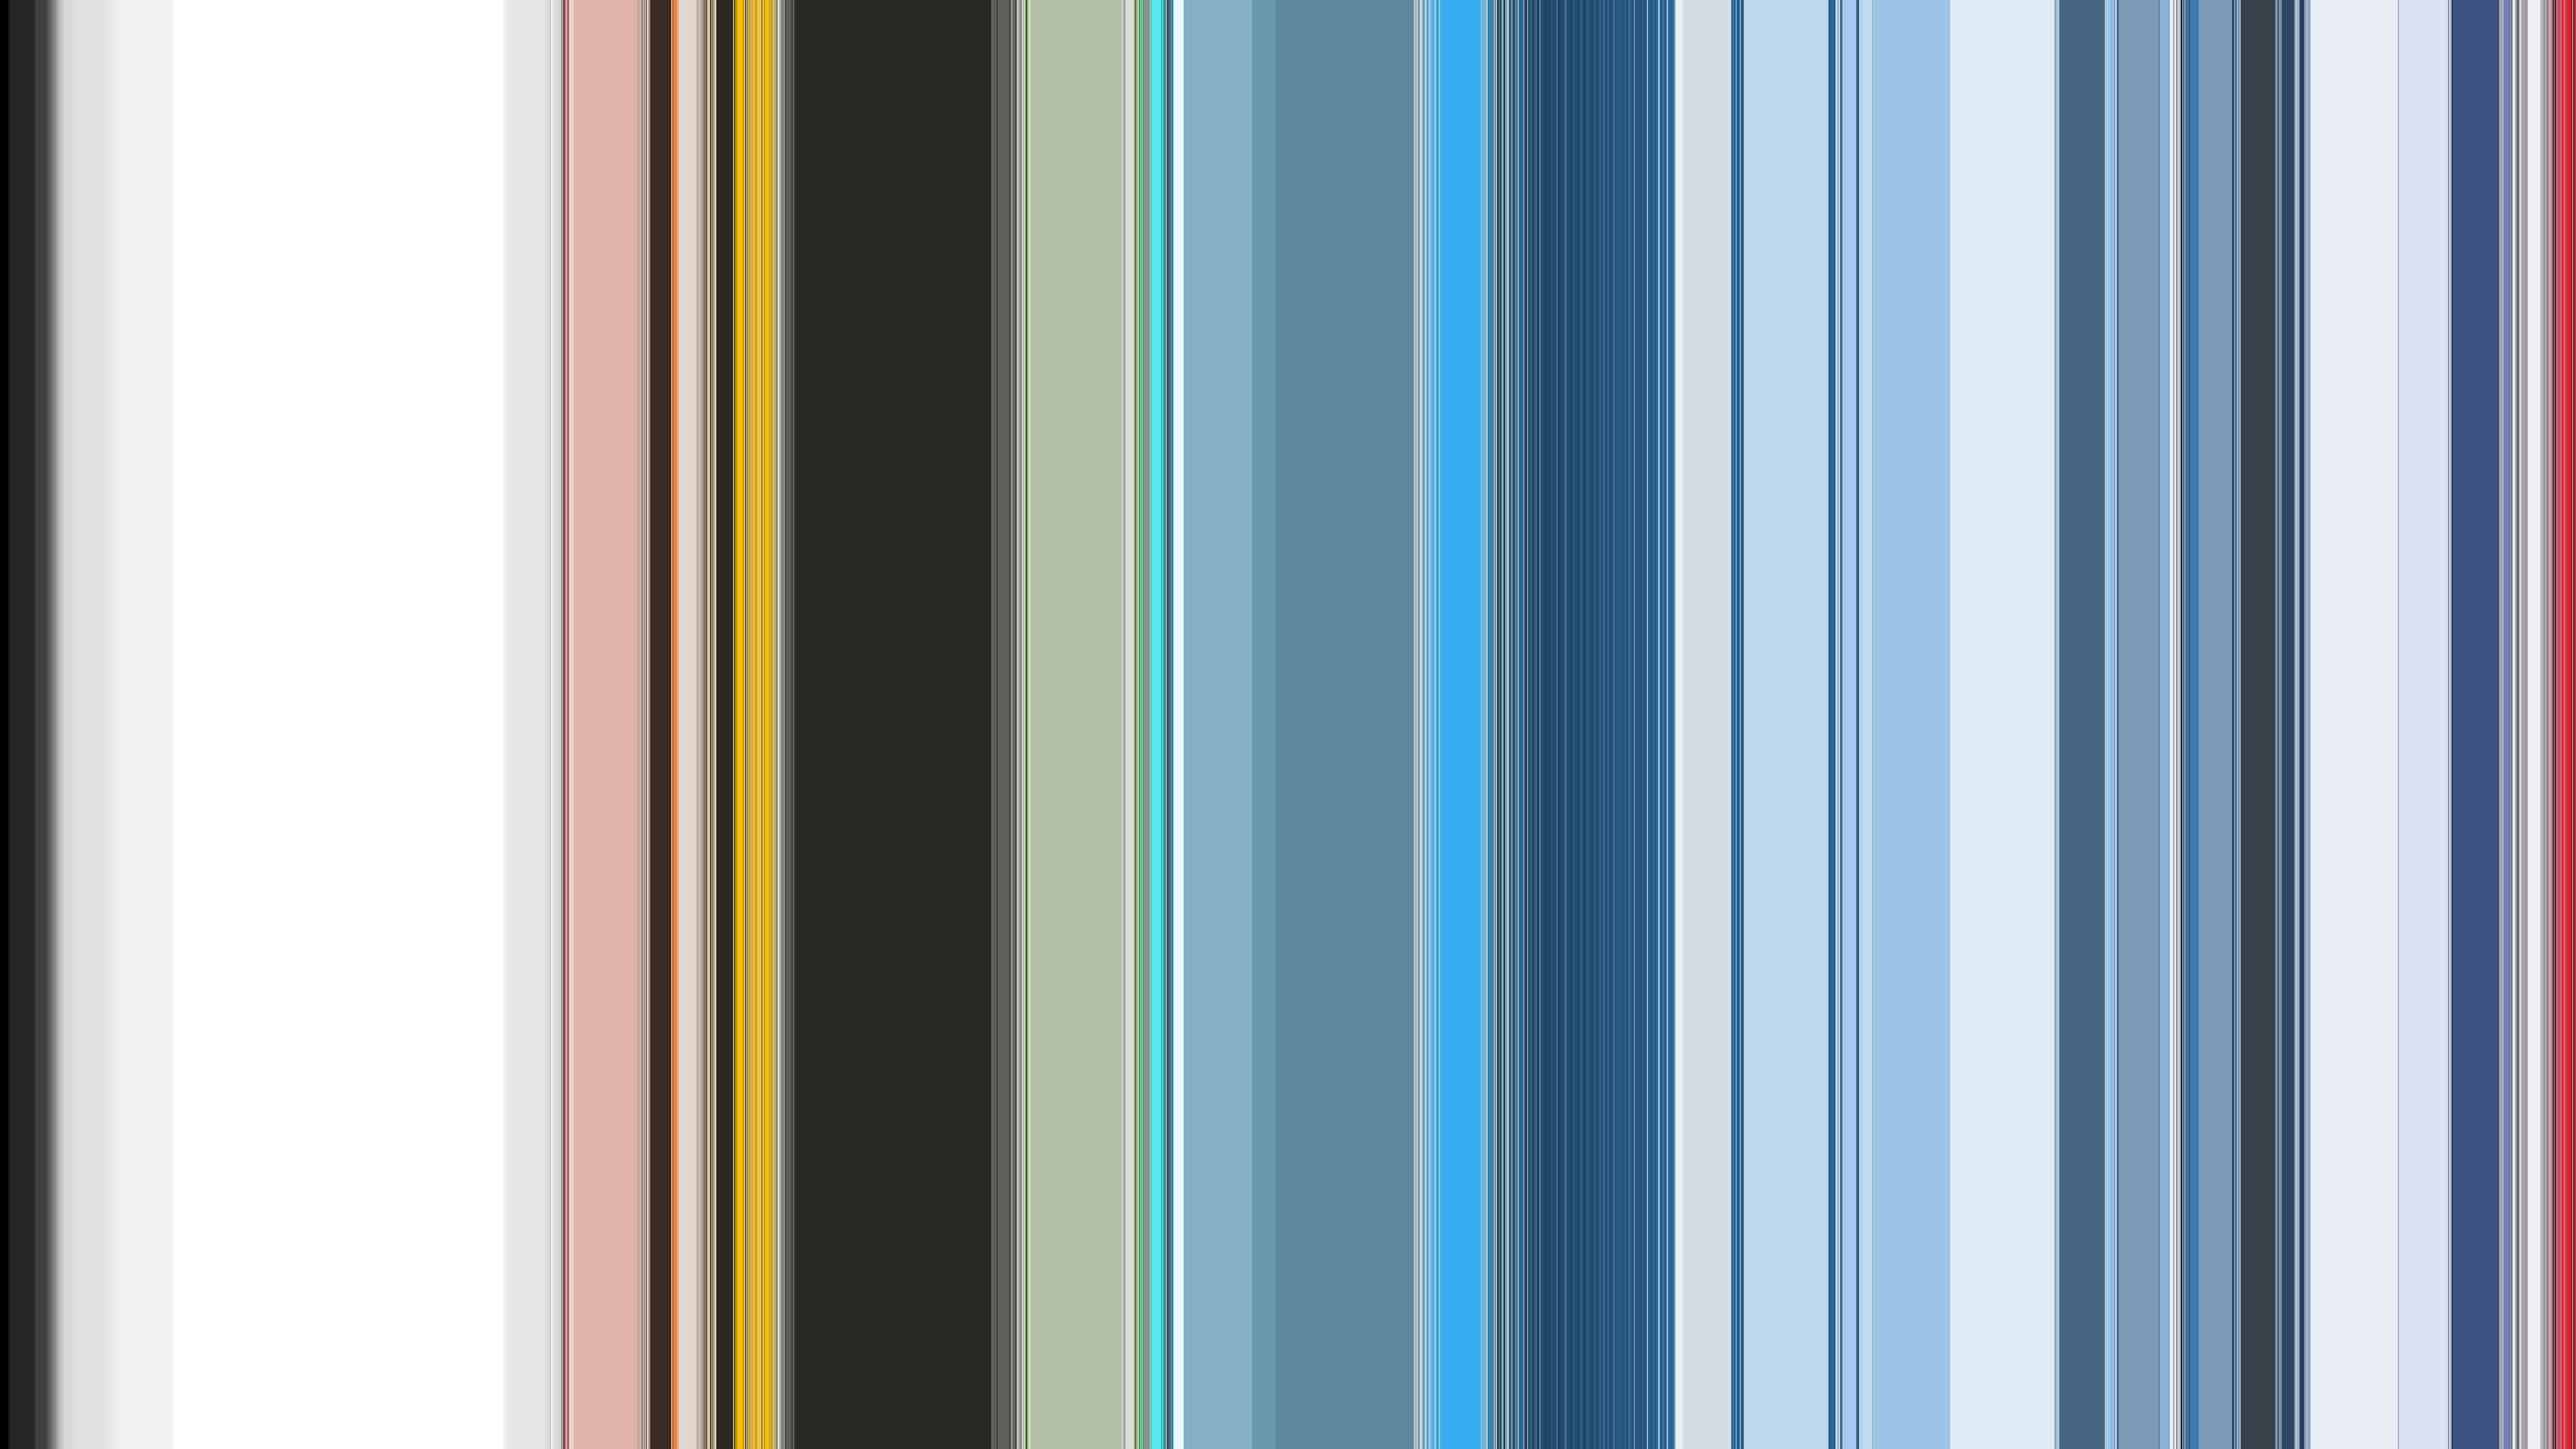 Horizontally stacked bars, most are blue